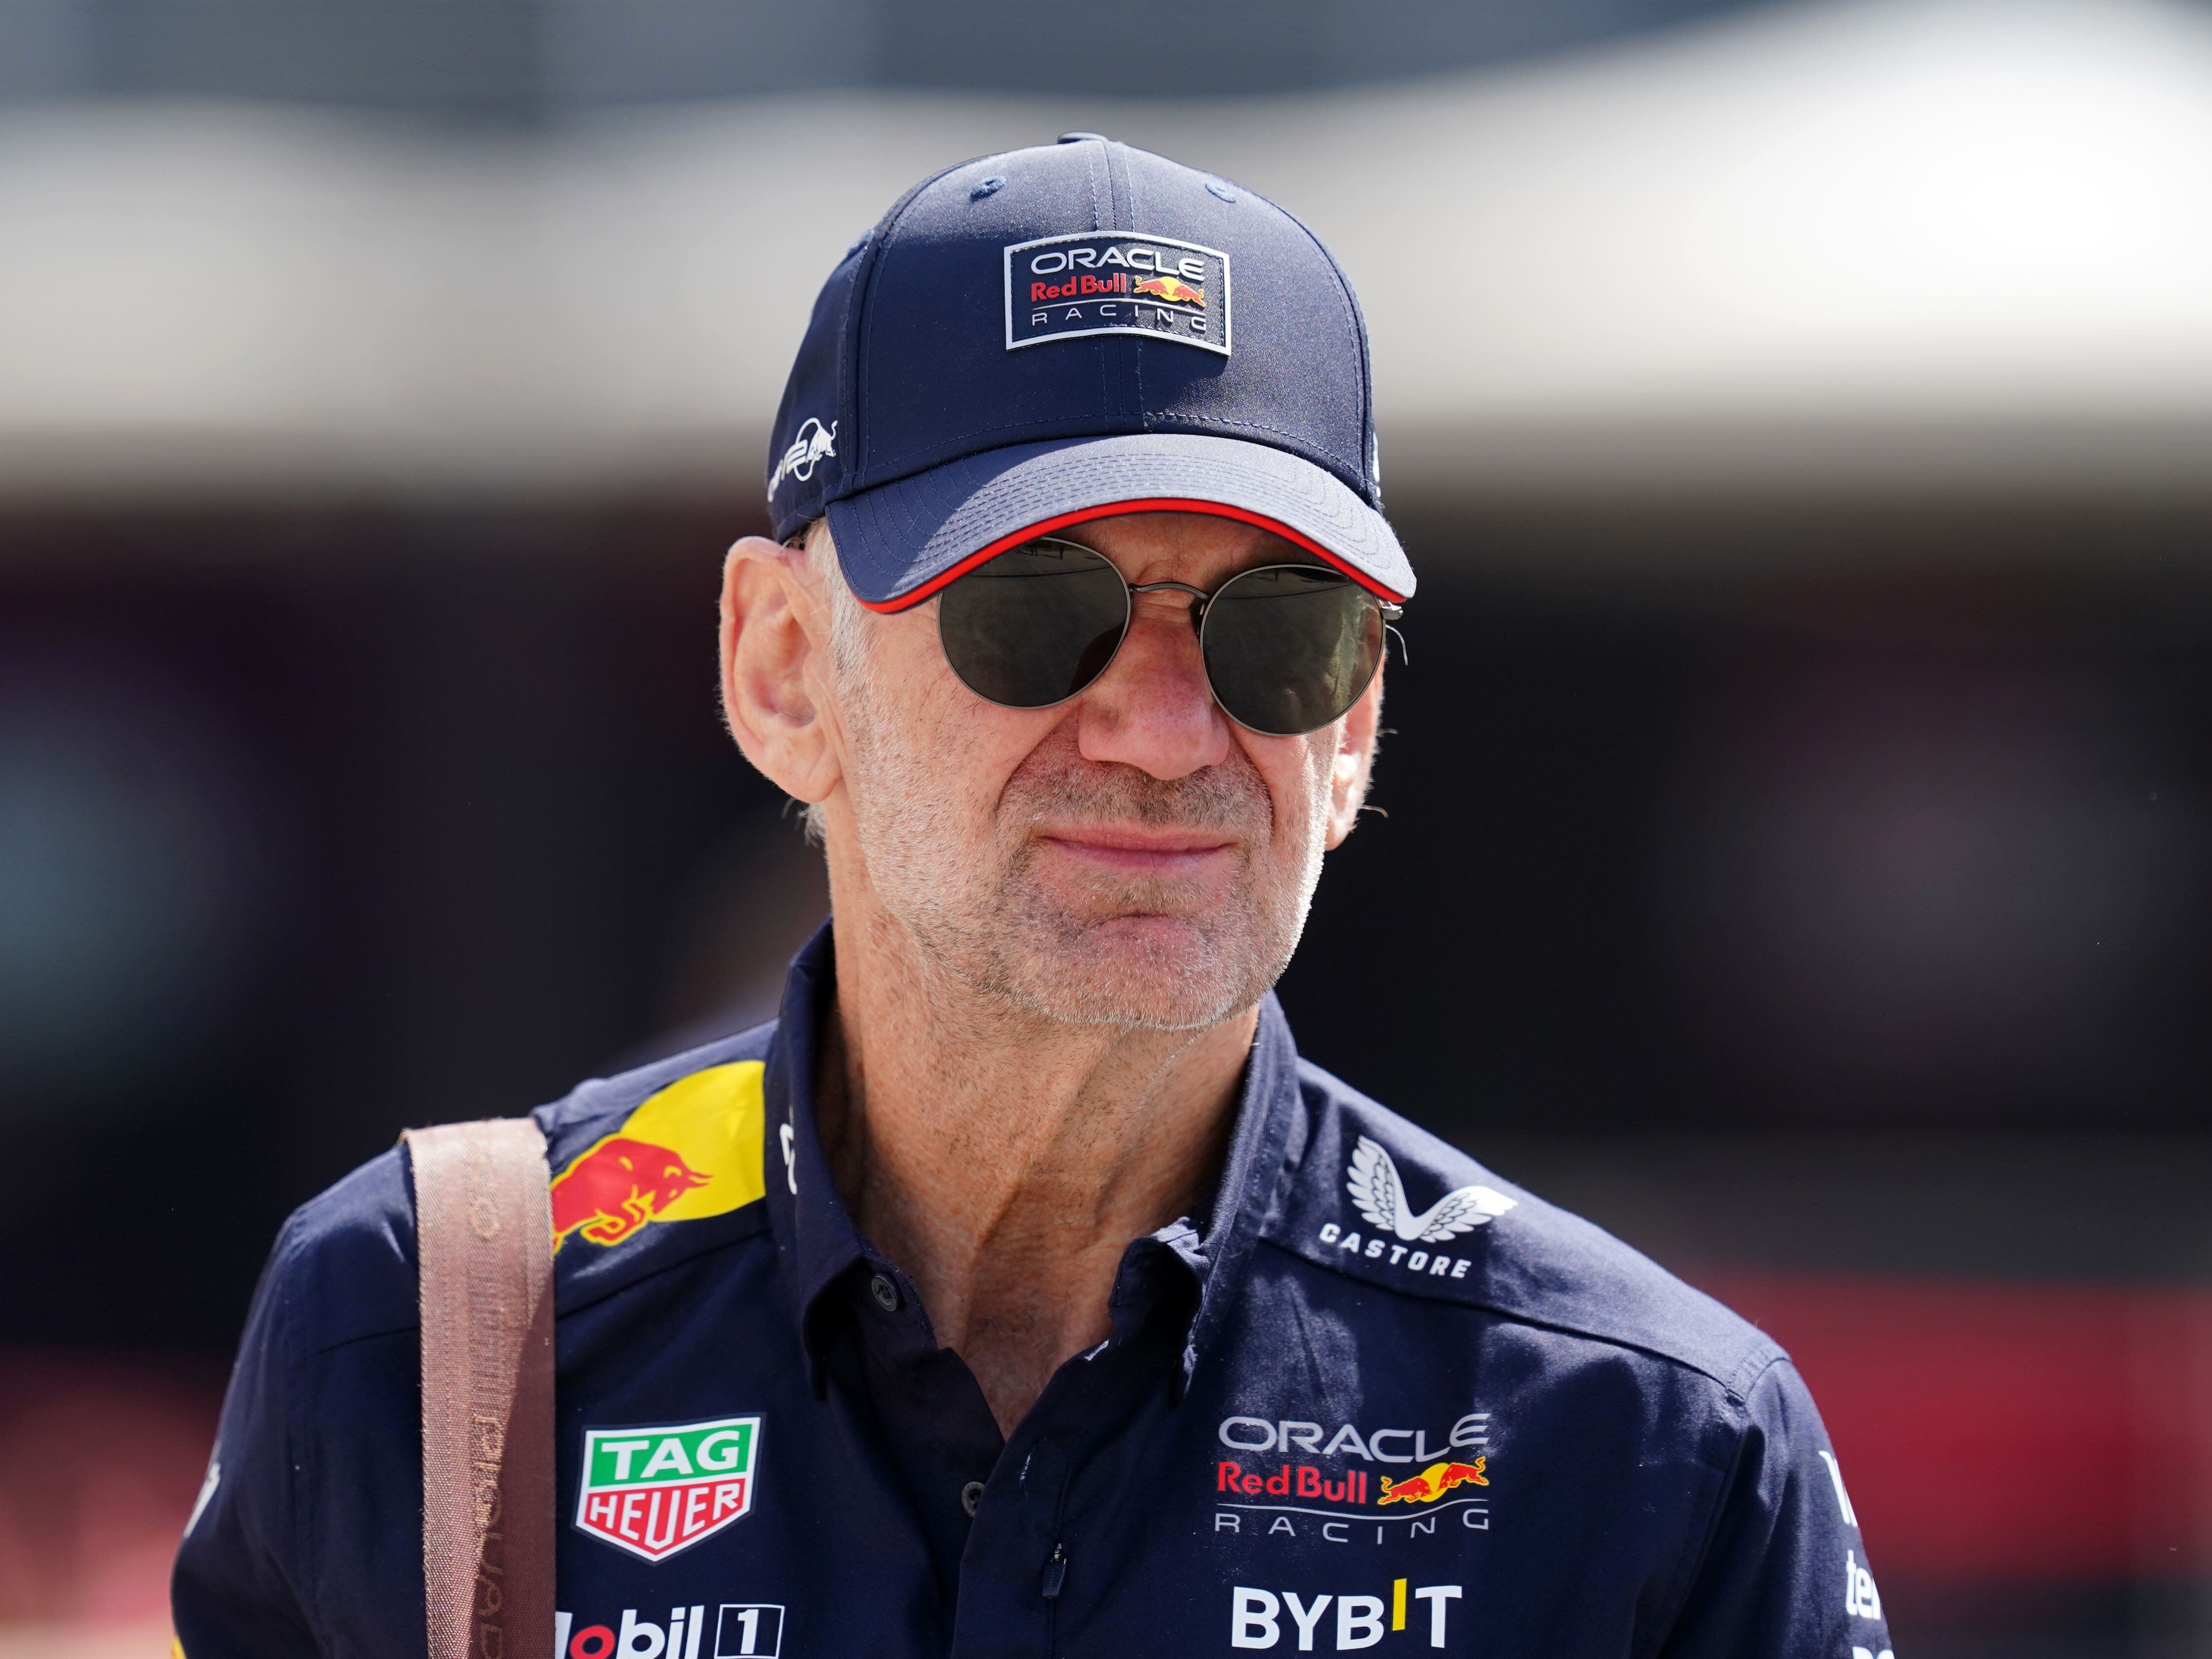 Designer Adrian Newey reportedly keen to leave Red Bull